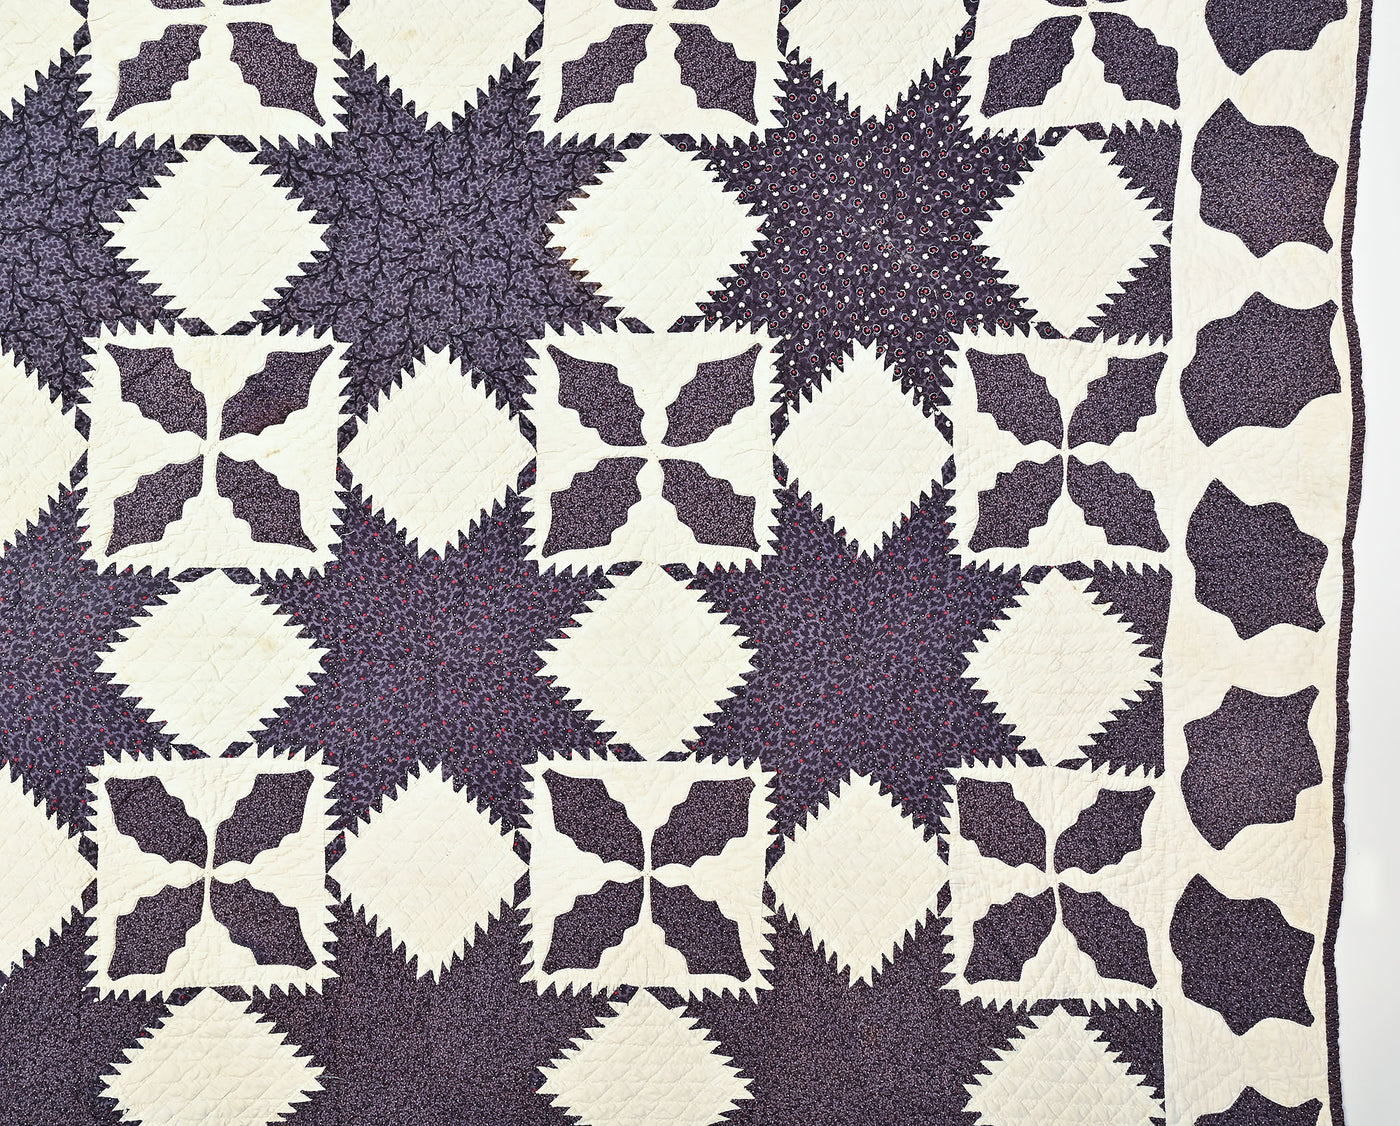 Feathered Stars Quilt in unusual Purple Calico Fabrics